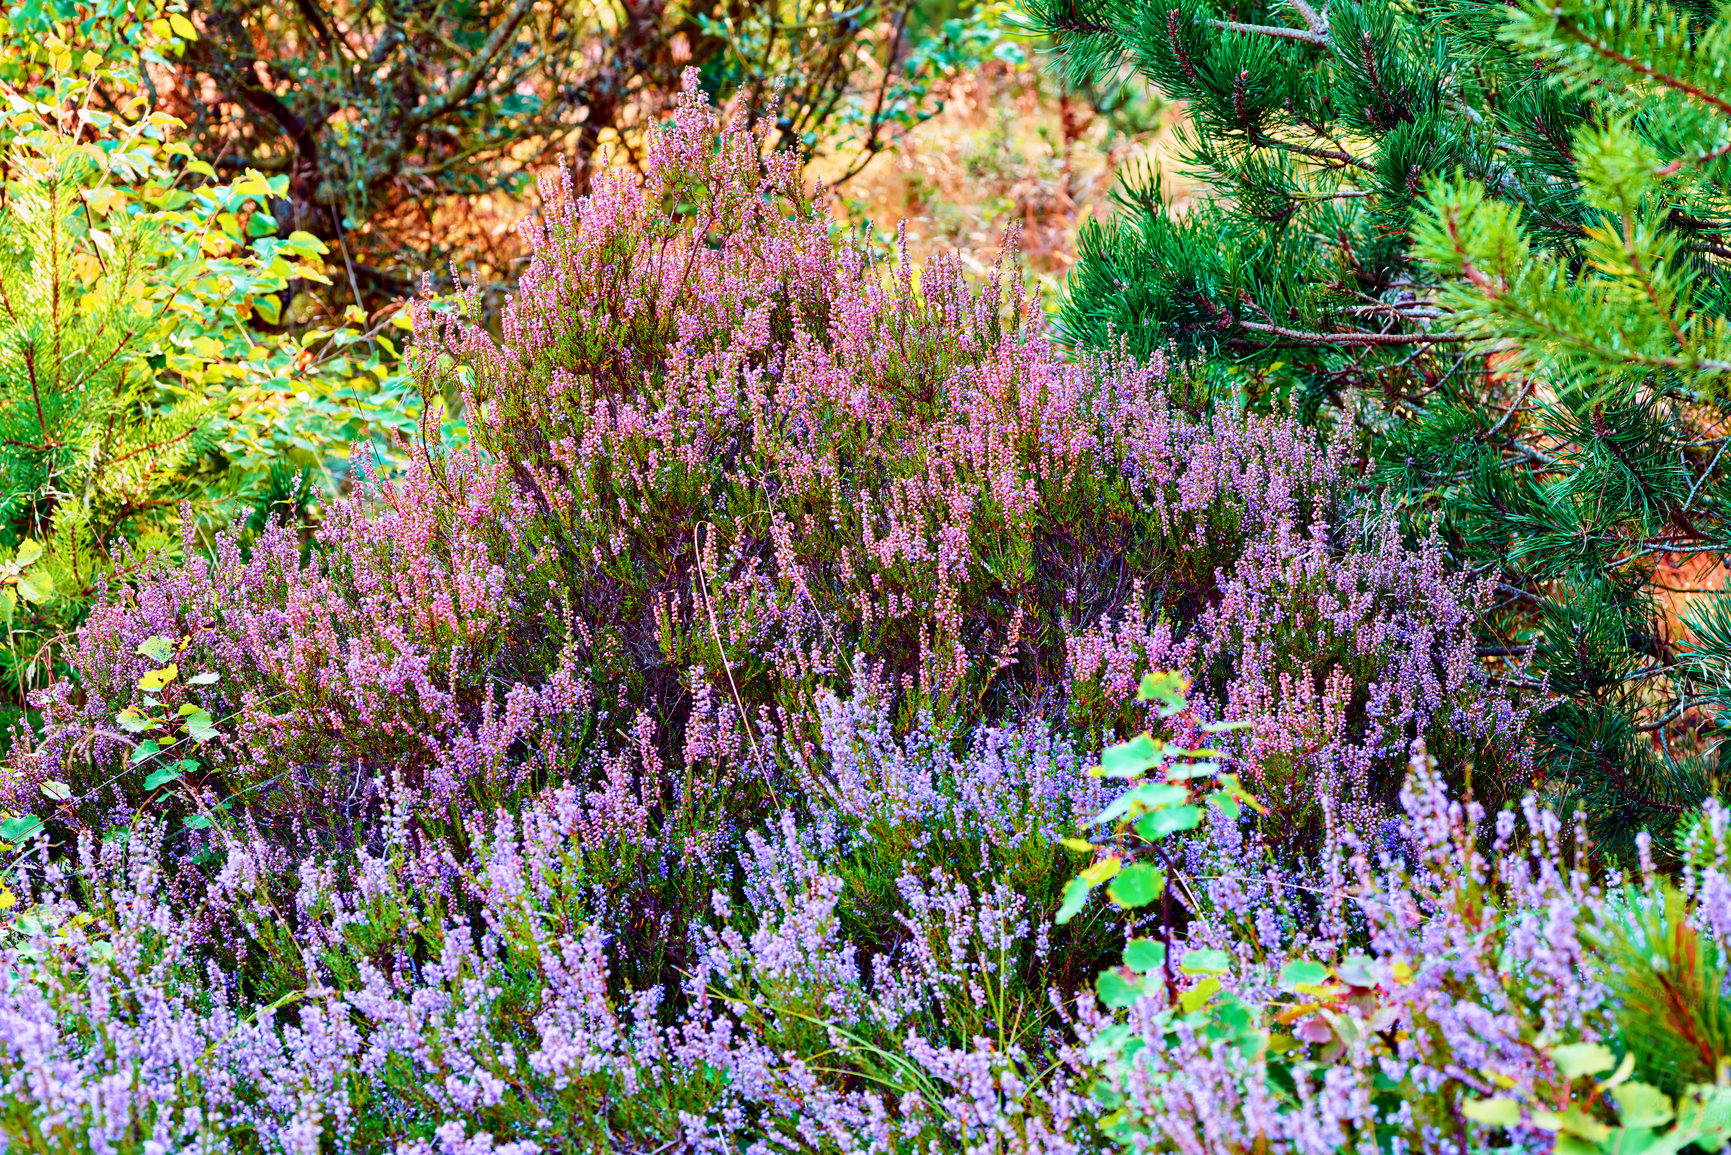 Buy stock photo Heather growing in a wild forest. Beautiful landscape of purple flower flourishing in nature surrounded by pine trees. Scenic view of lush foliage vegetation in an uncultivated environment in Denmark